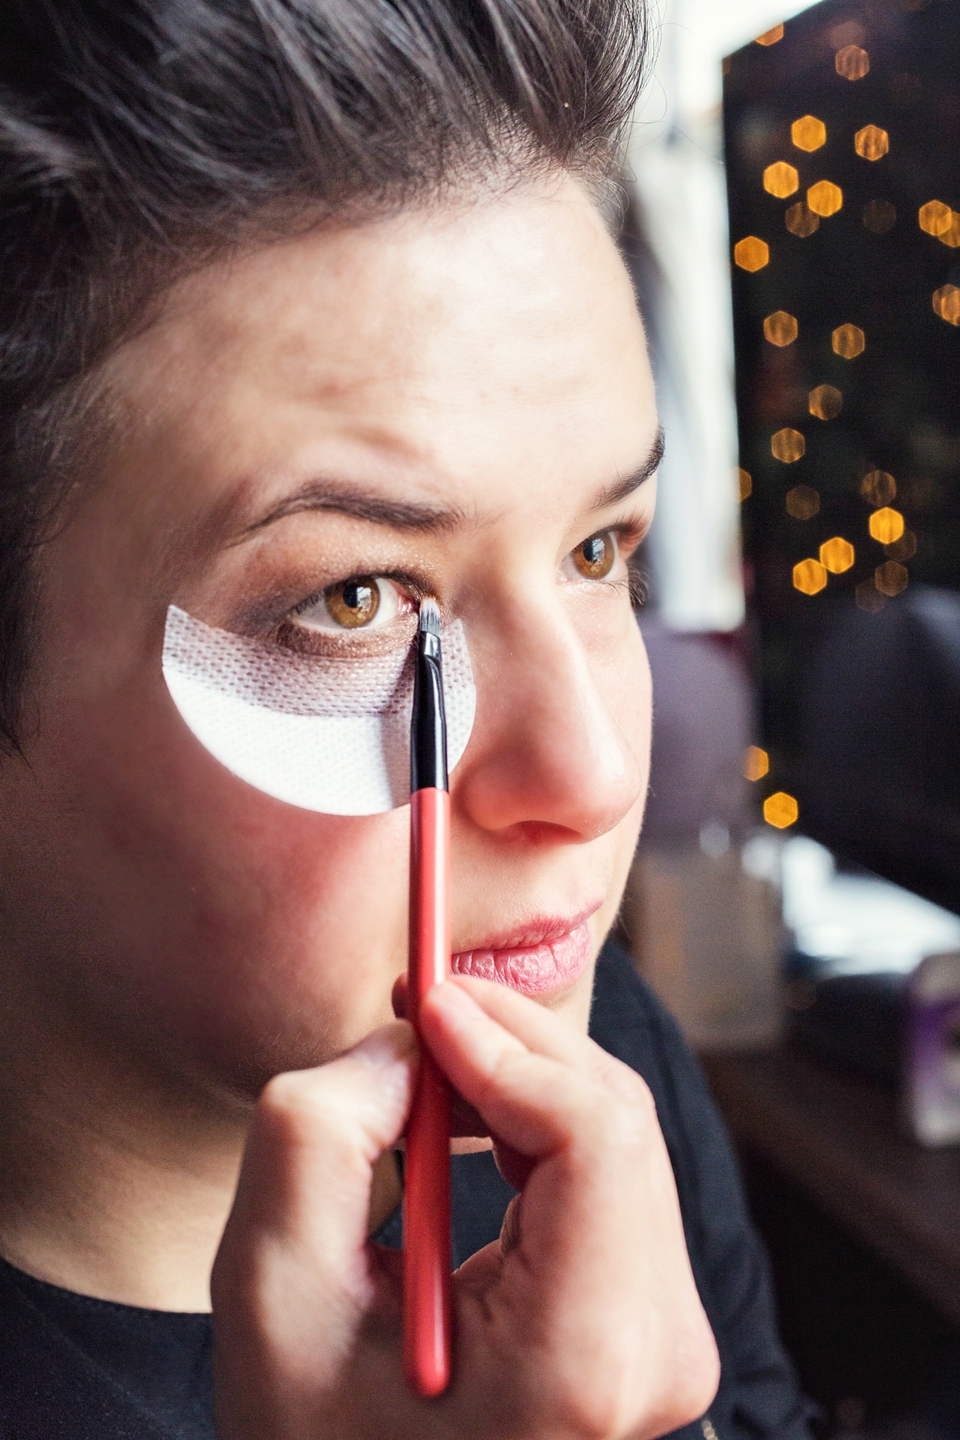 Christmas Party and Festive Makeup Tutorial: Sultry smoky eyes, glowy skin and a red lip